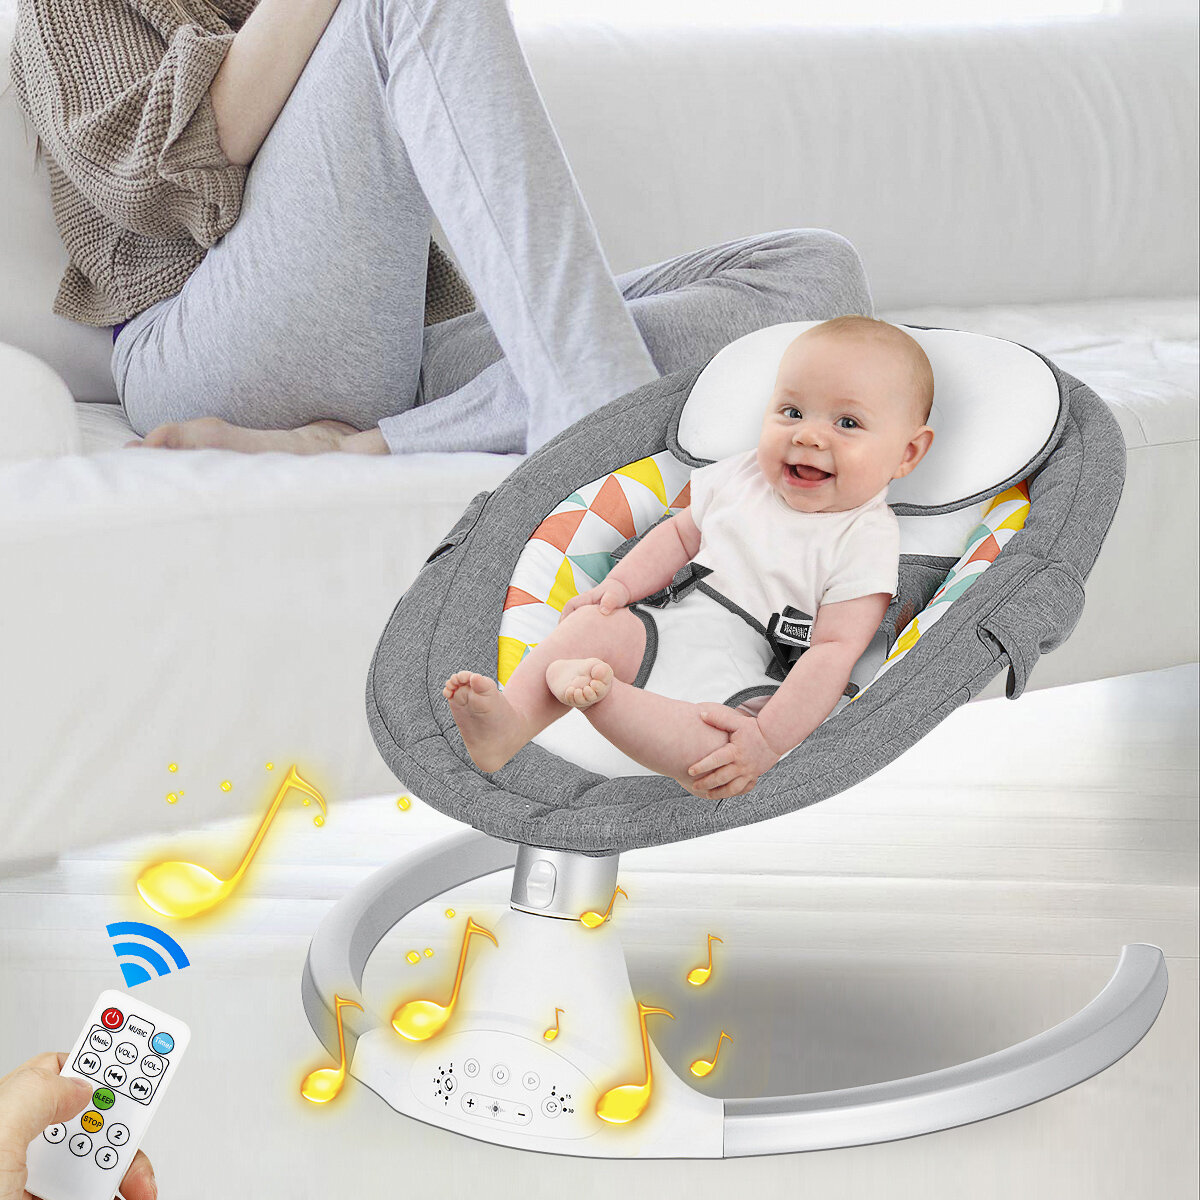 Bioby Electric Rocking Chair for Baby to Soothe Baby to Sleep Magic Device Comfort Chair for Child Rocking Chair